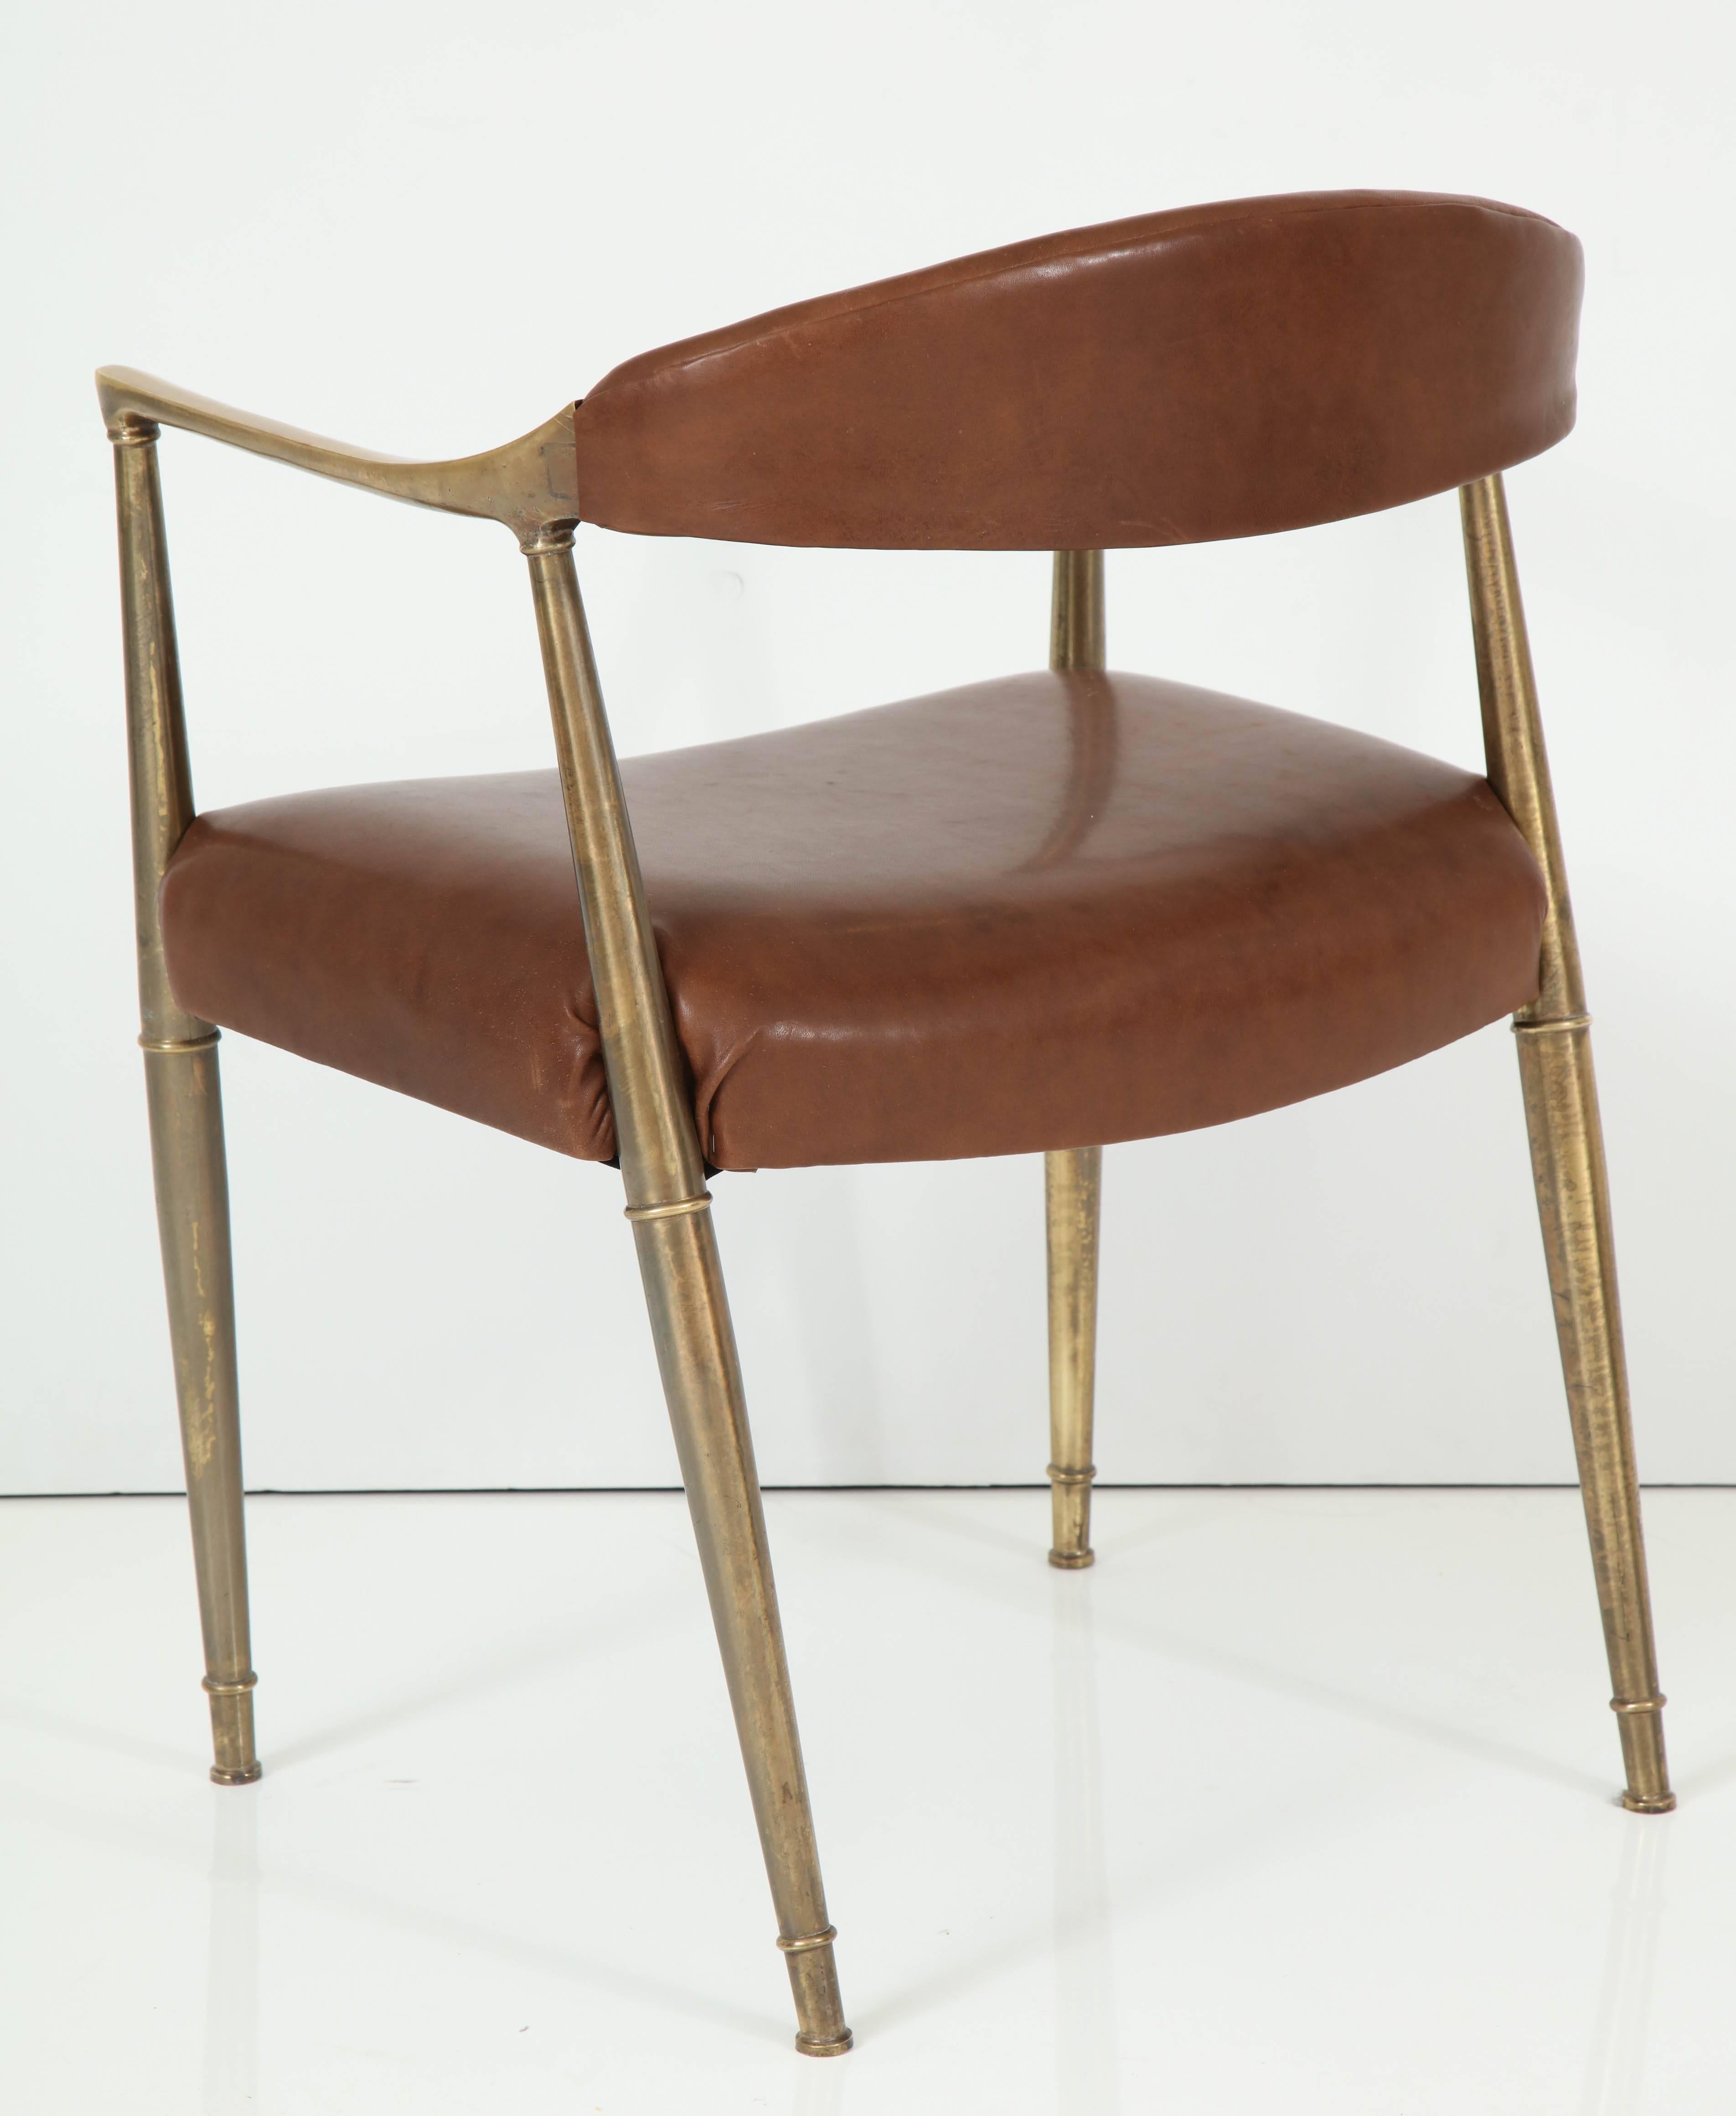 Mid-20th Century Italian Brass Armchair in Saddle Leather For Sale